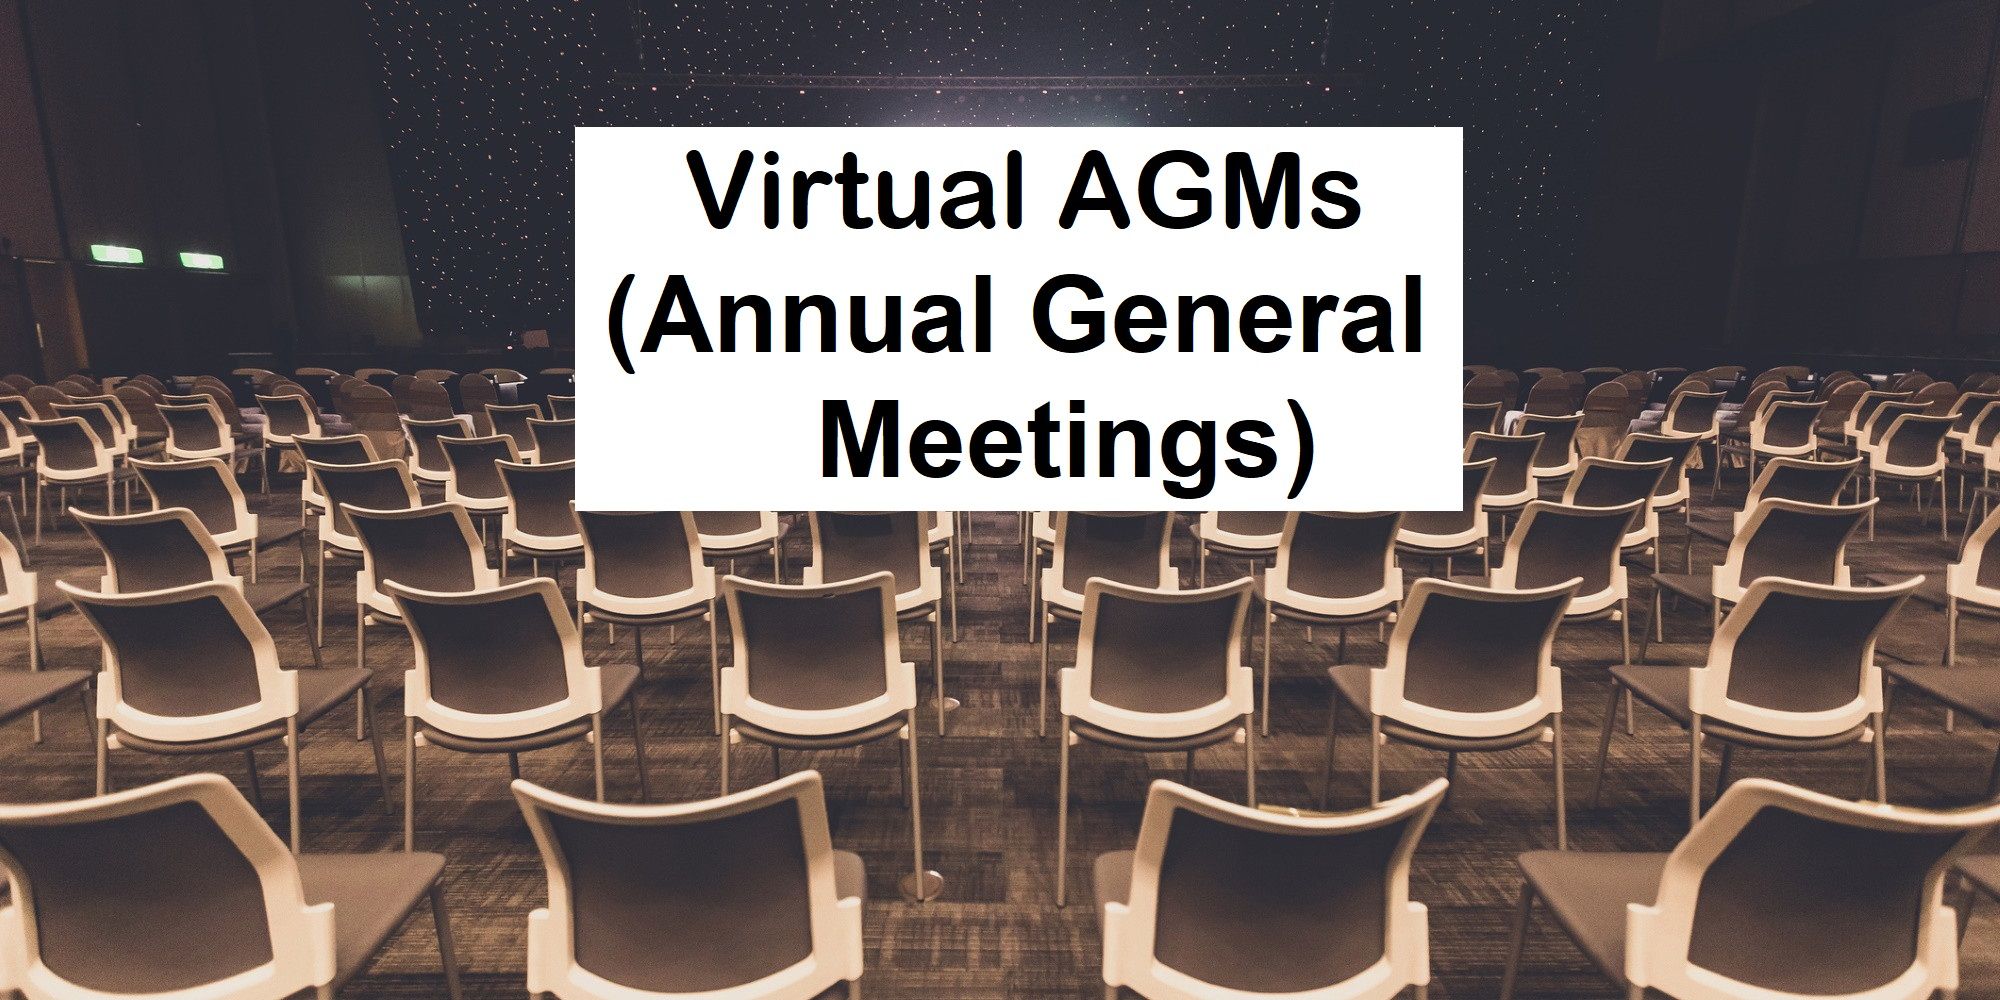 Host Virtual AGM Services in india